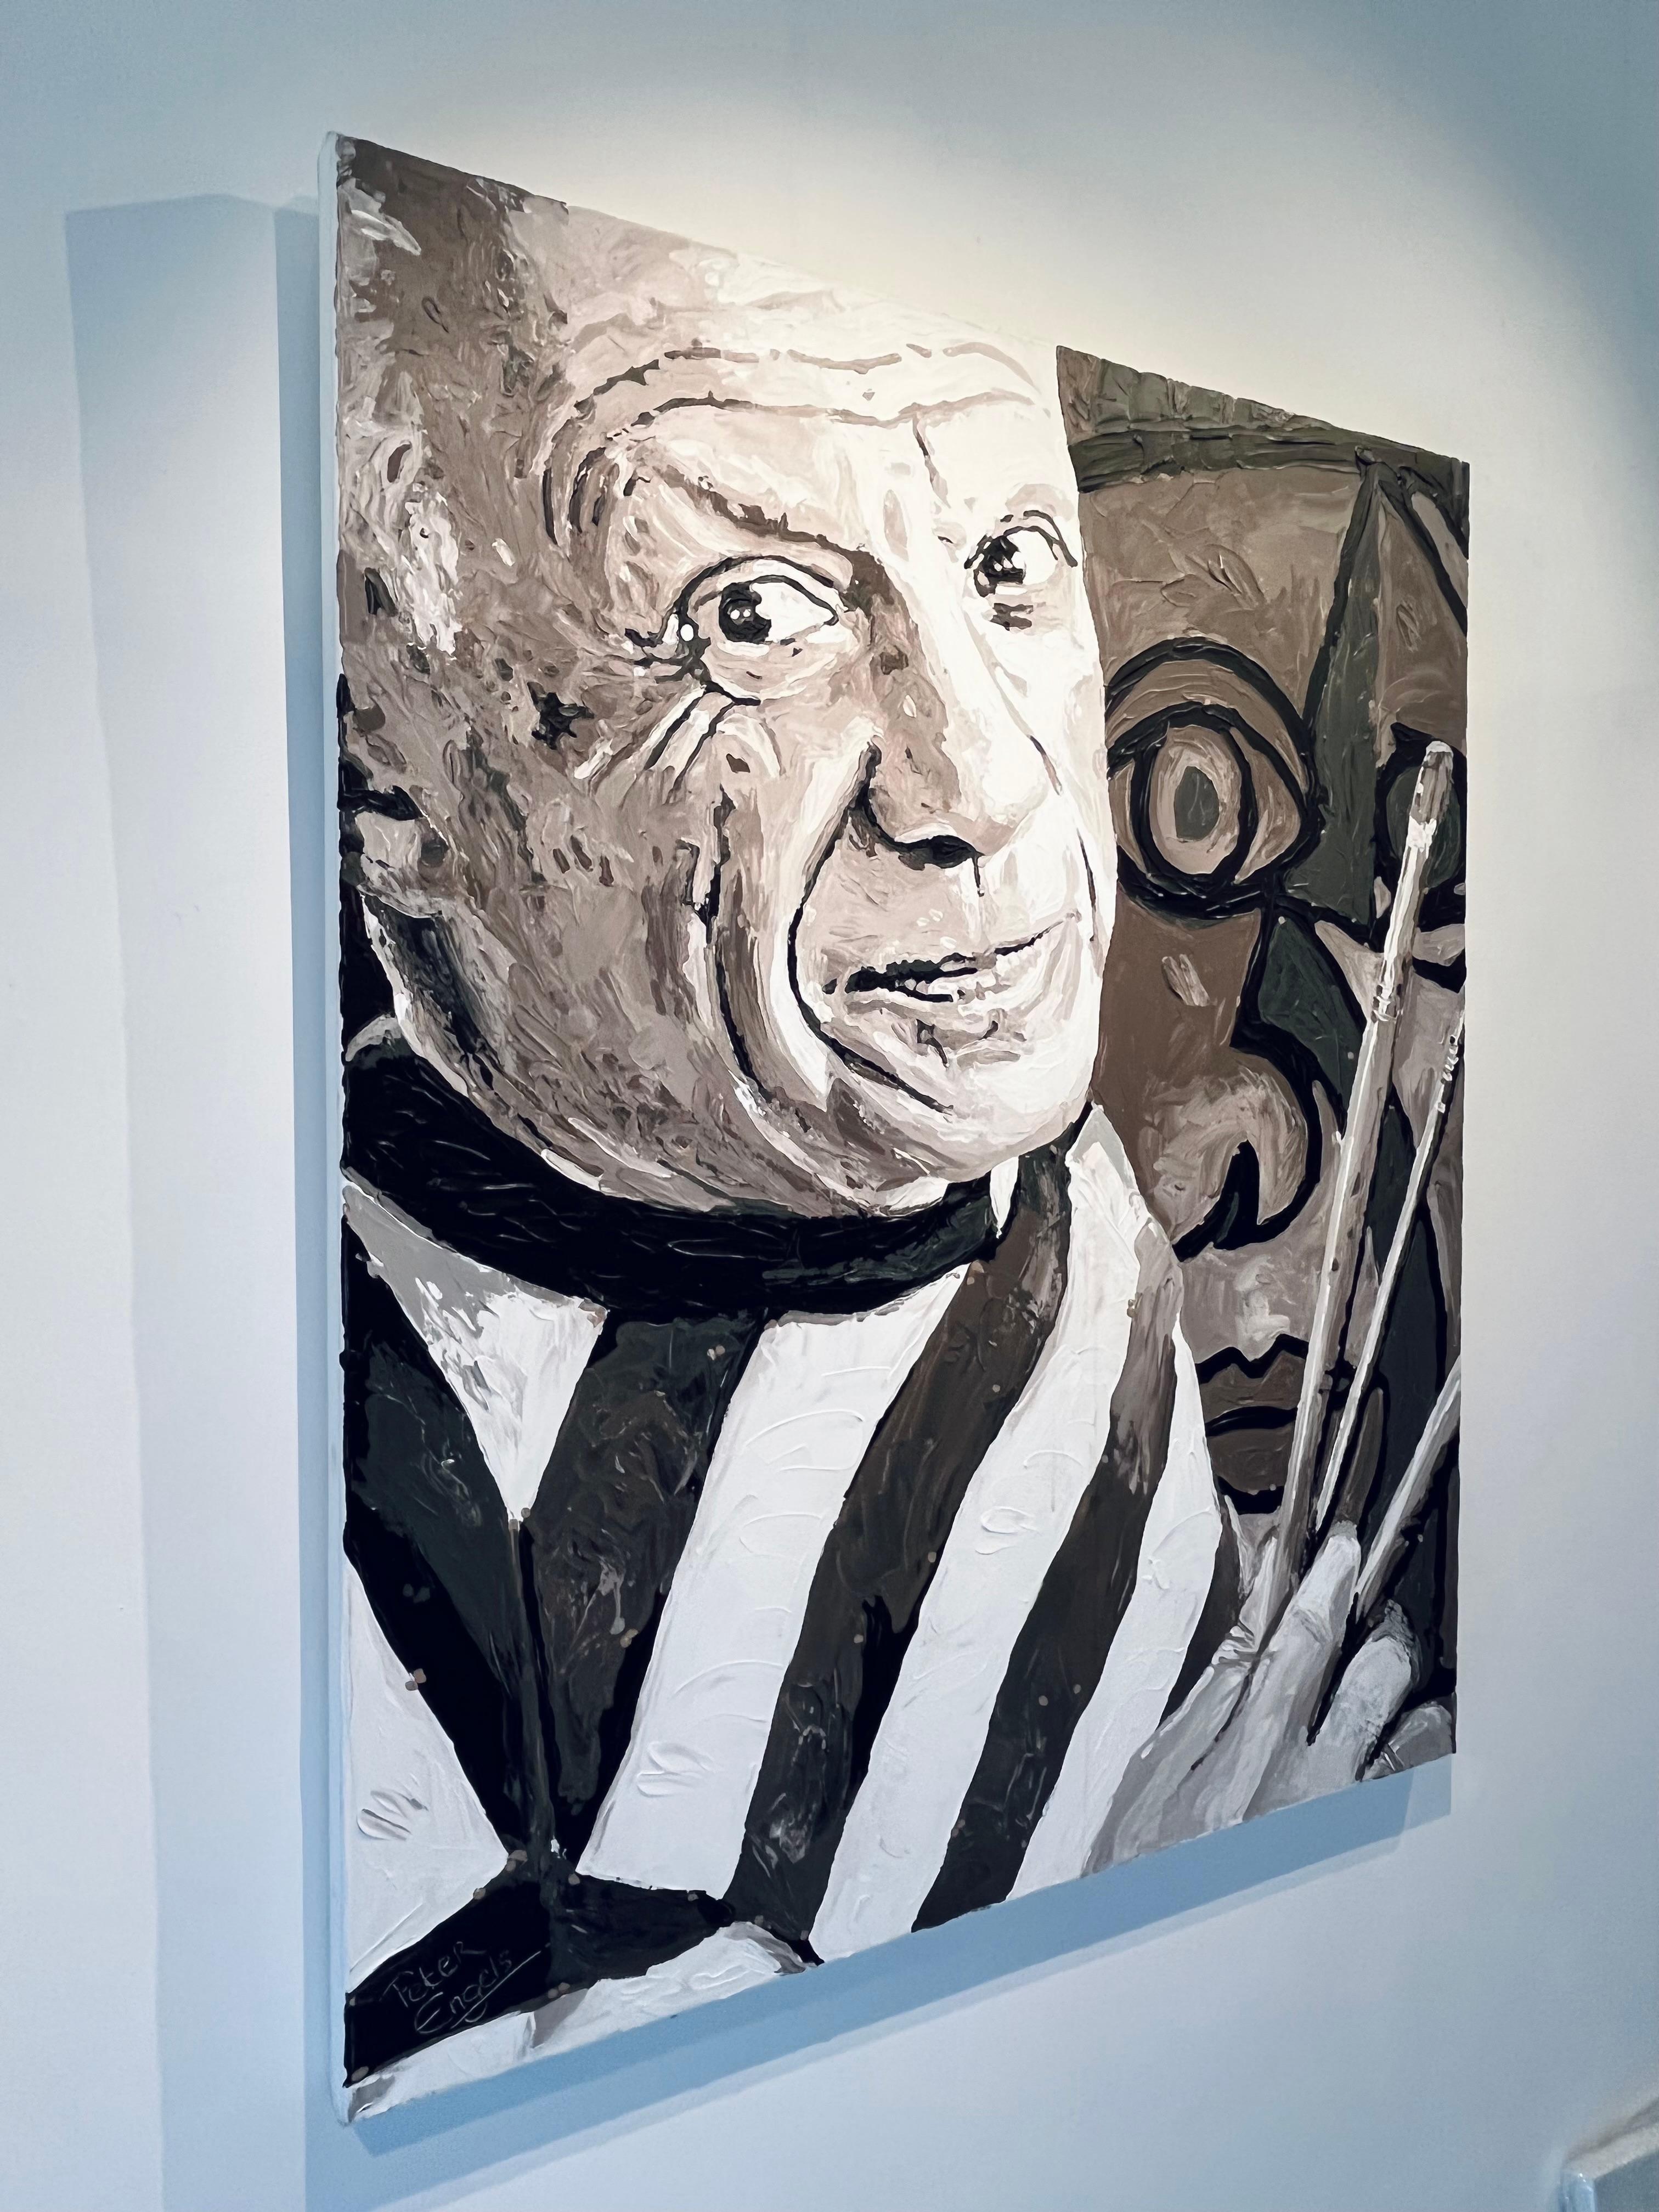 Pablo Picasso (+ quote says believe in your imagination and it’s real) - Artwork For Sale 1